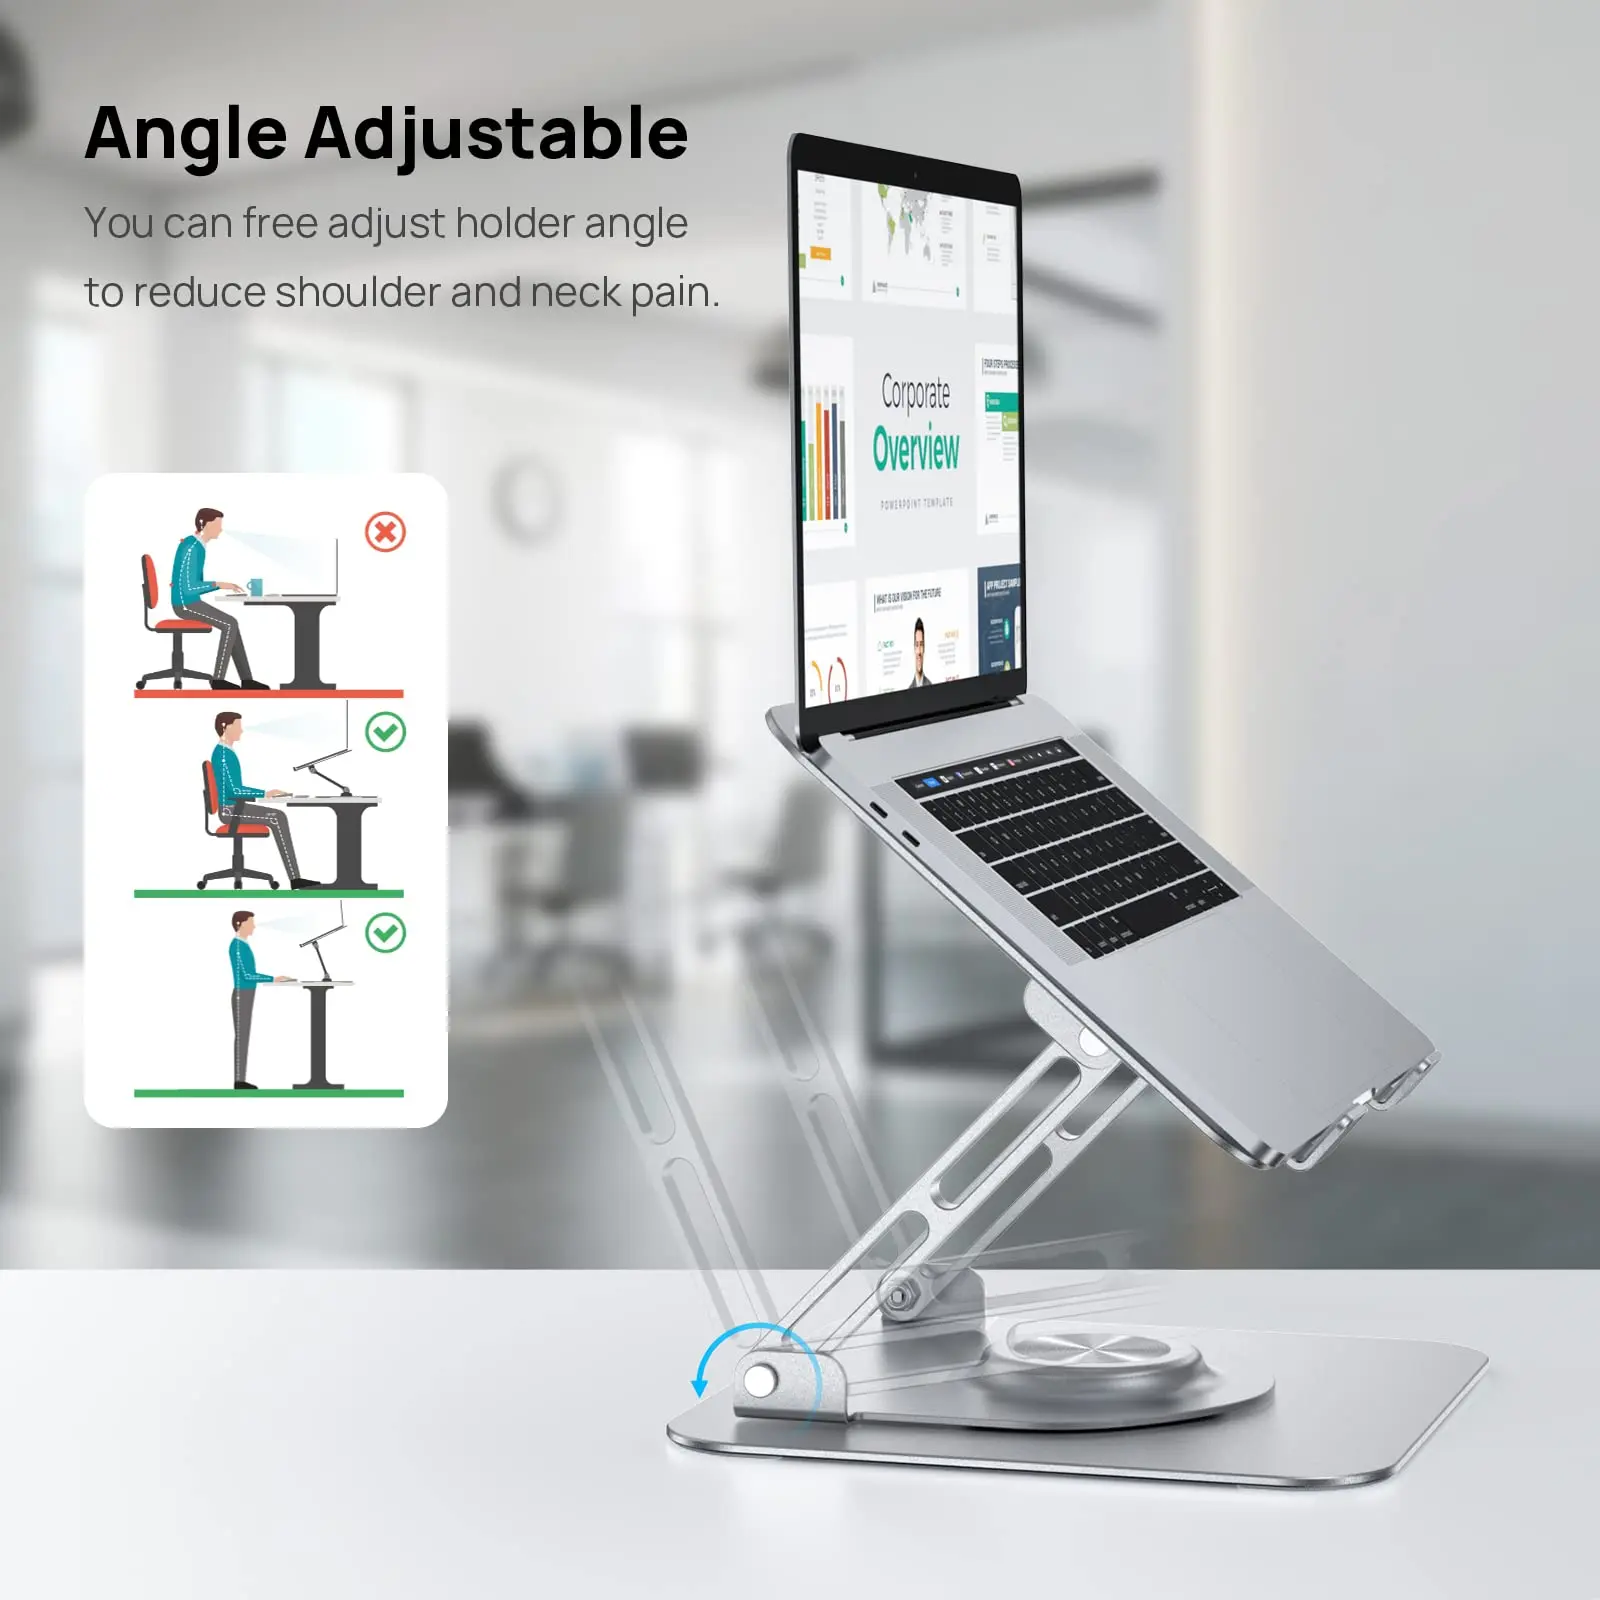 Top Seller Cell Phone Stand Desk Computer Adjustable Notebook Stand